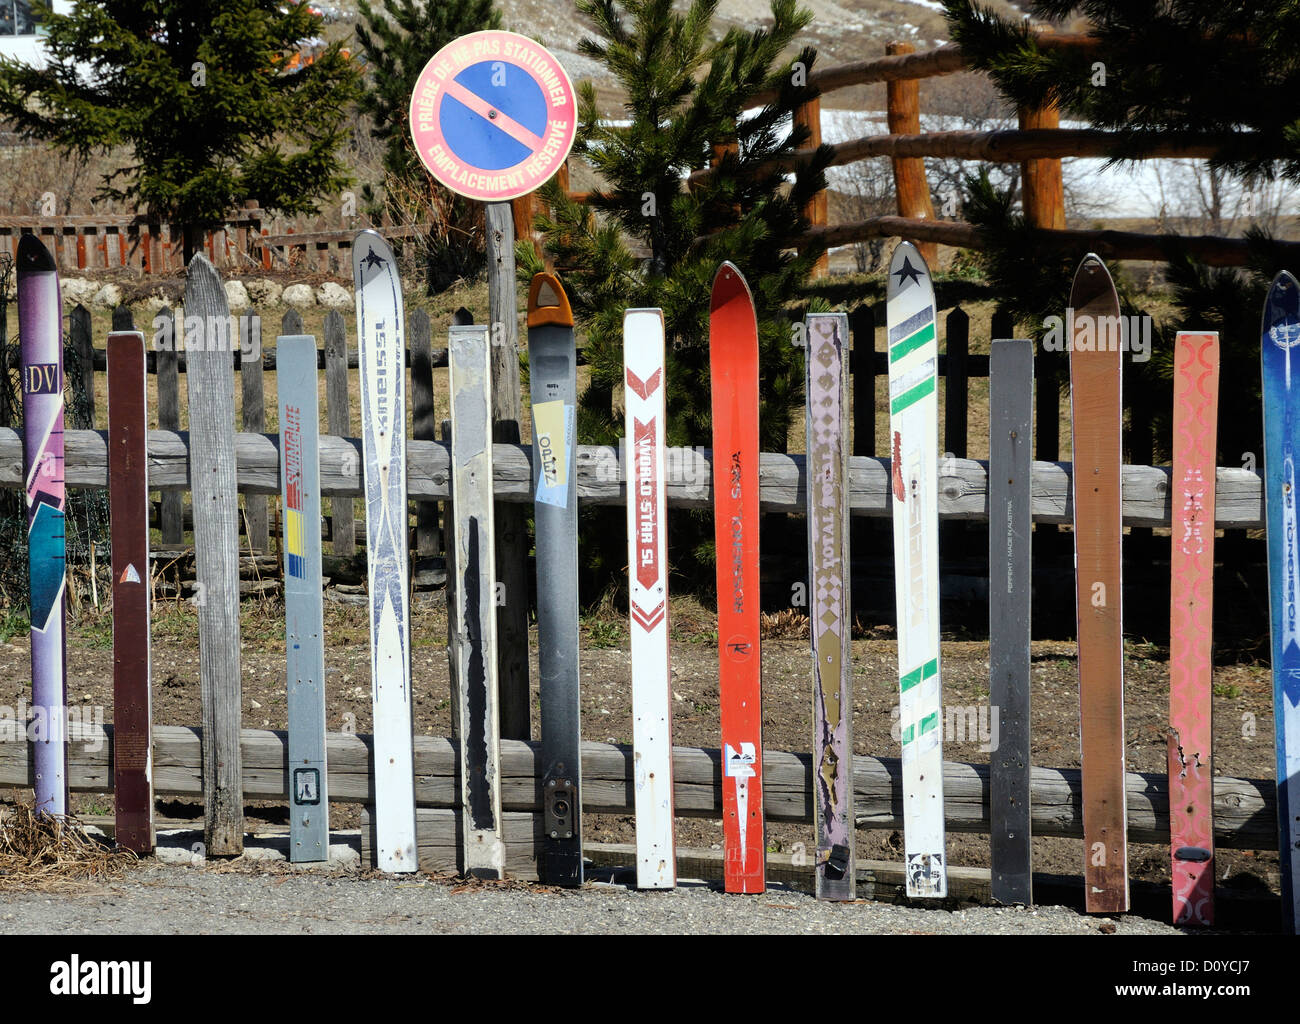 A picket fence made using old skis. Val d'Isere, Savoie, France. Stock Photo